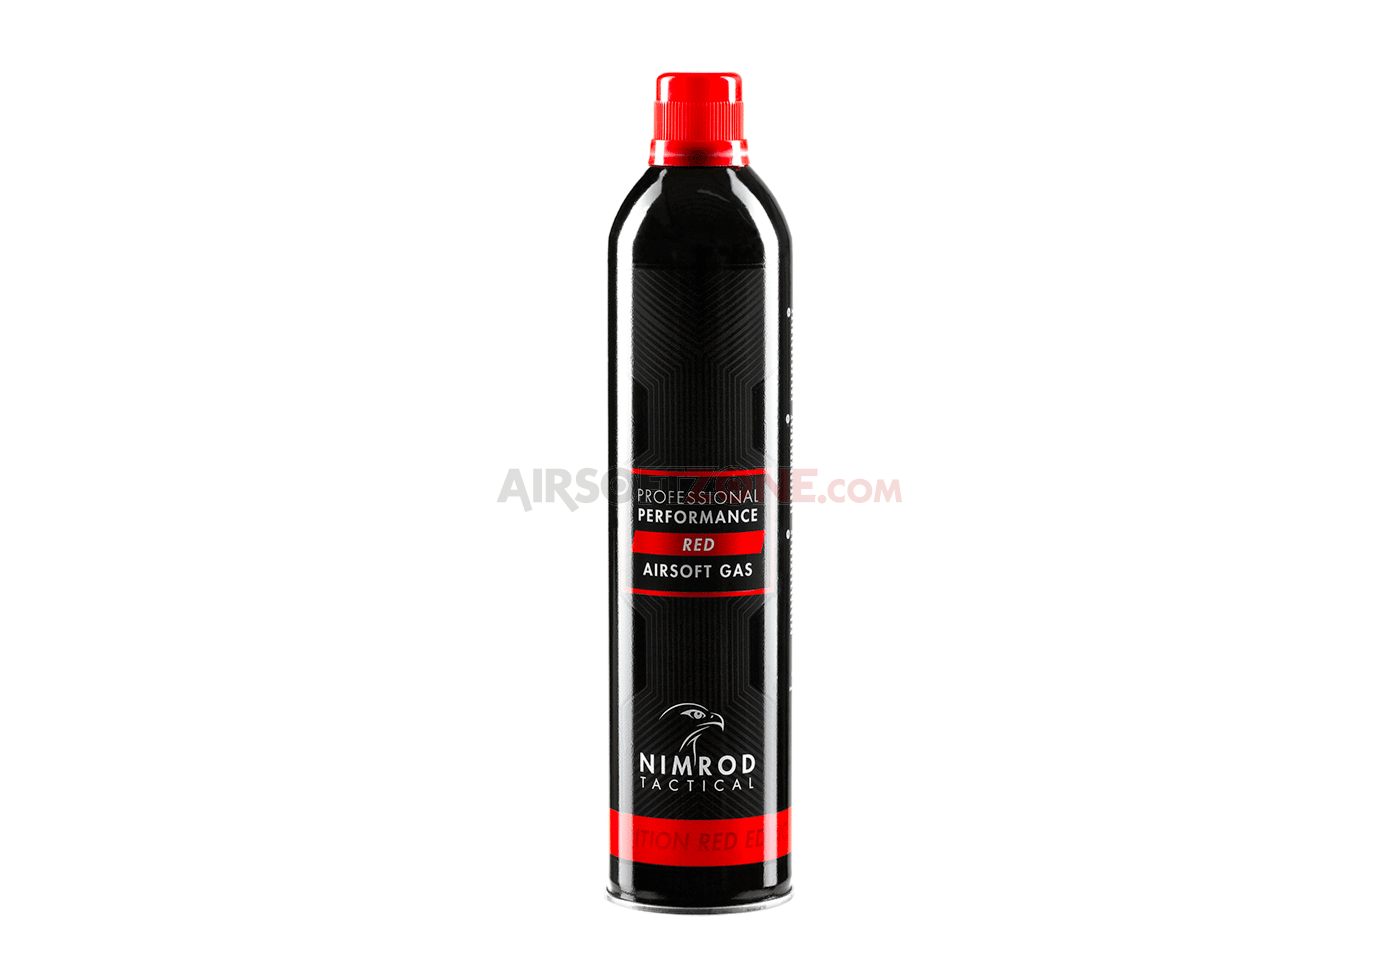 GREEN GAS PROFESSIONAL PERFORMANCE RED - 500ML